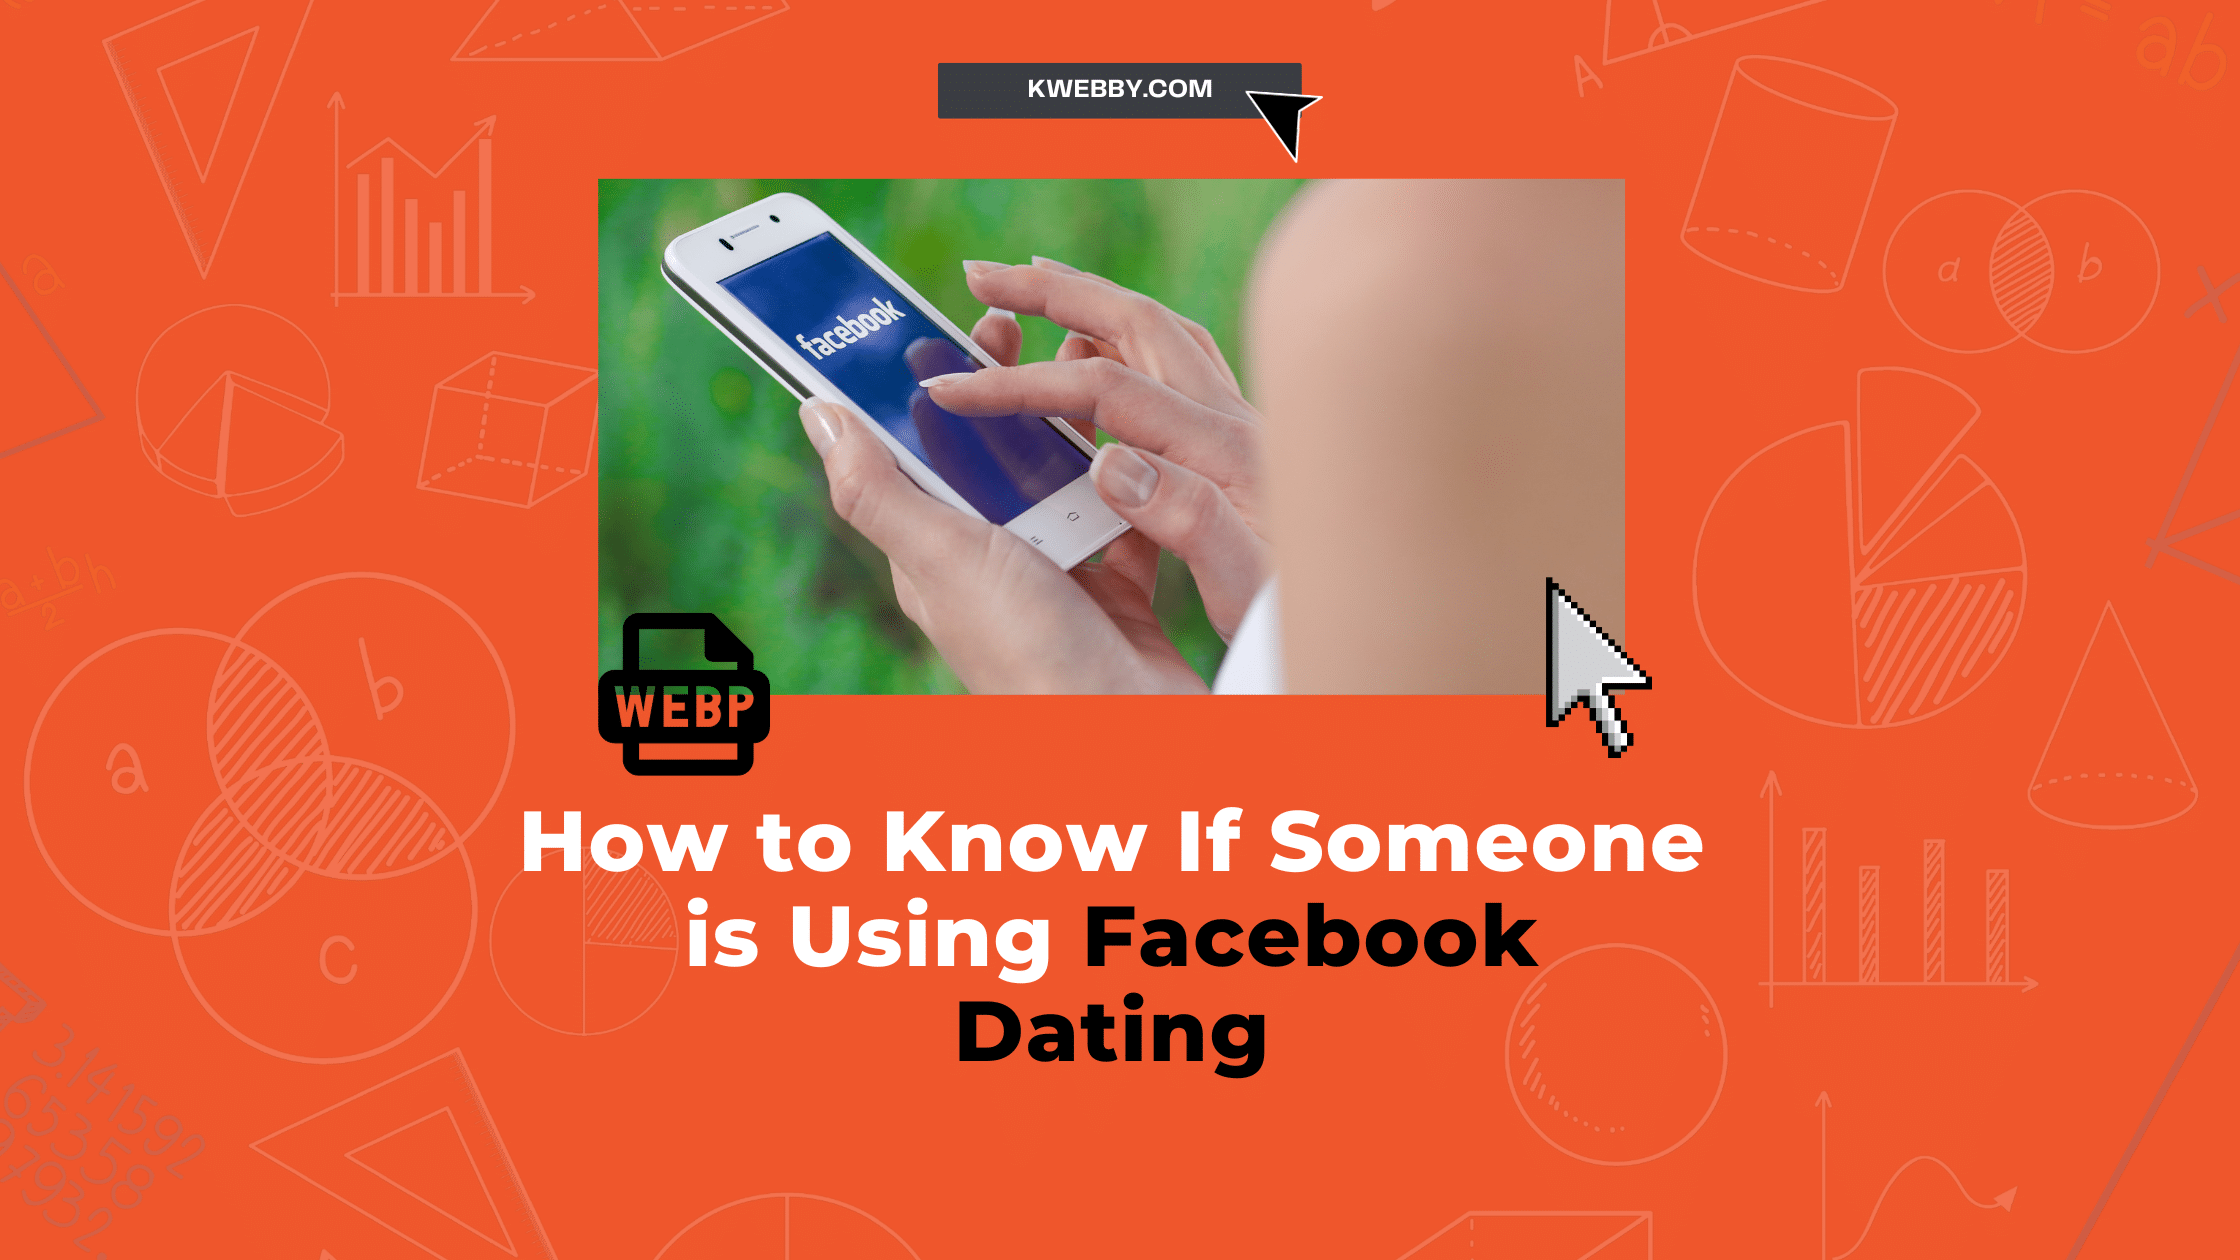 How to Know If Someone is Using Facebook Dating